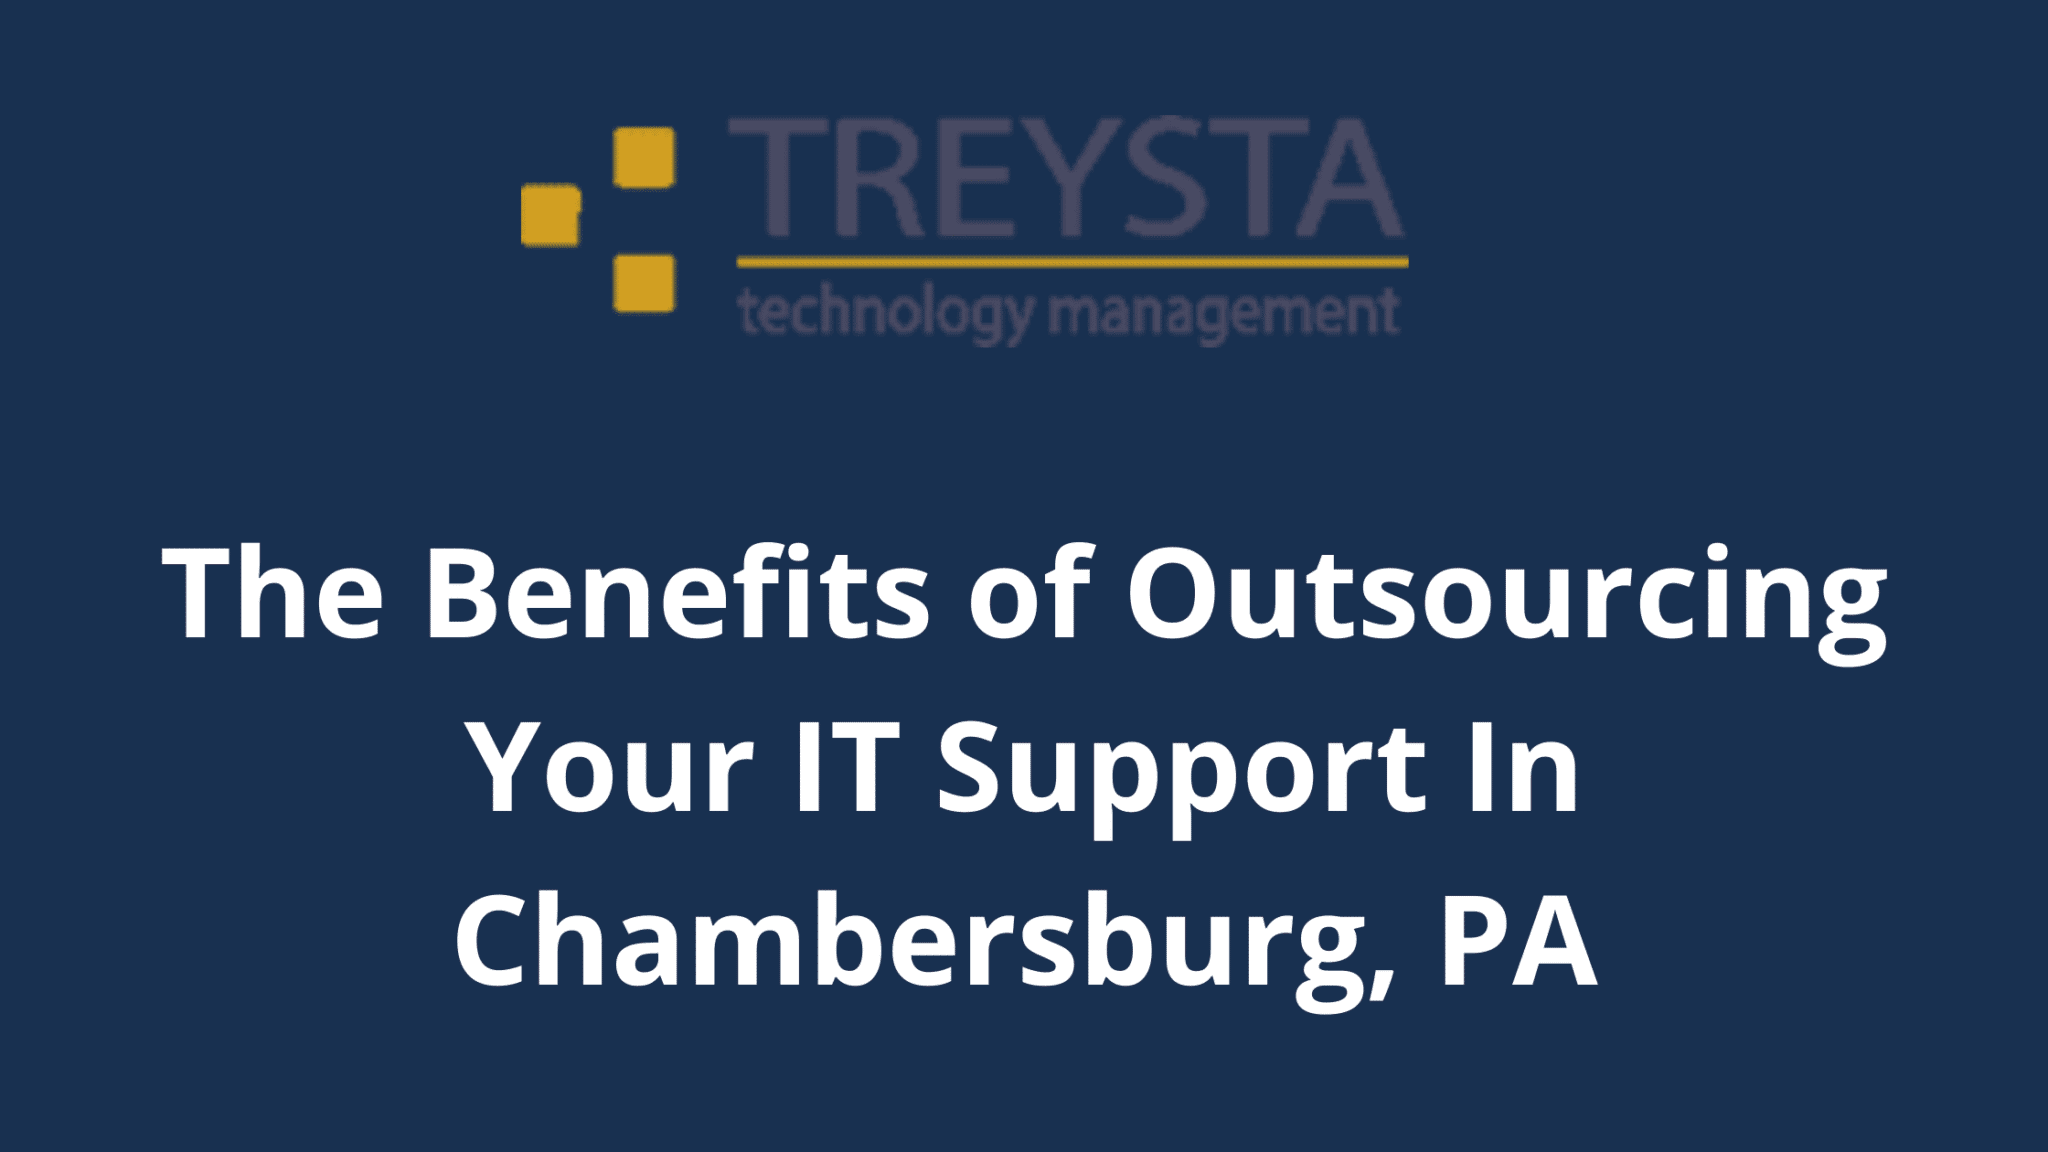 The Benefits of Outsourcing Your IT Support In Chambersburg, PA